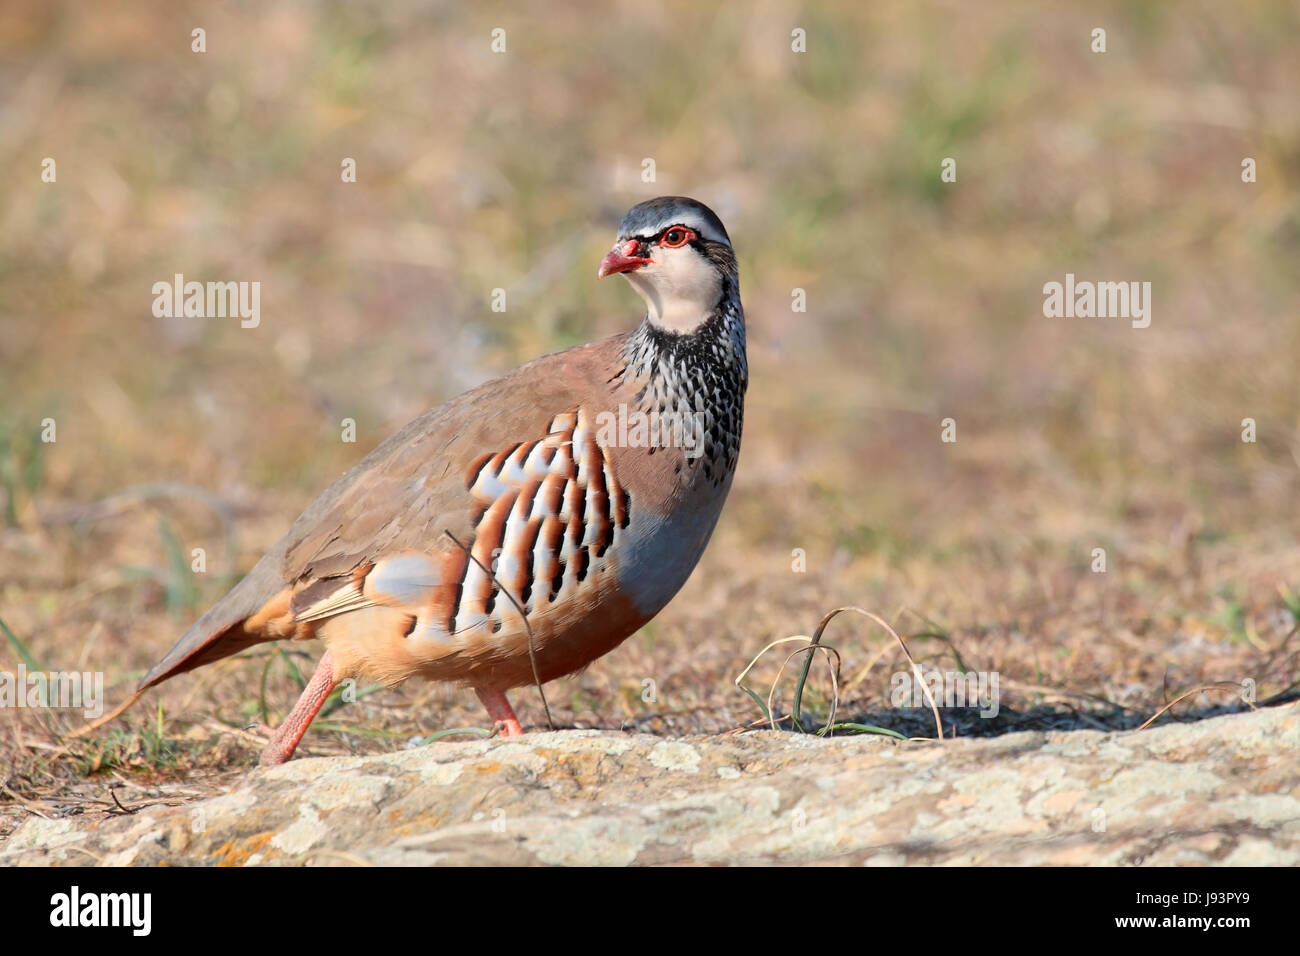 bird, wild, partridge, feather, hunting, chase, red, nature, species, Stock Photo